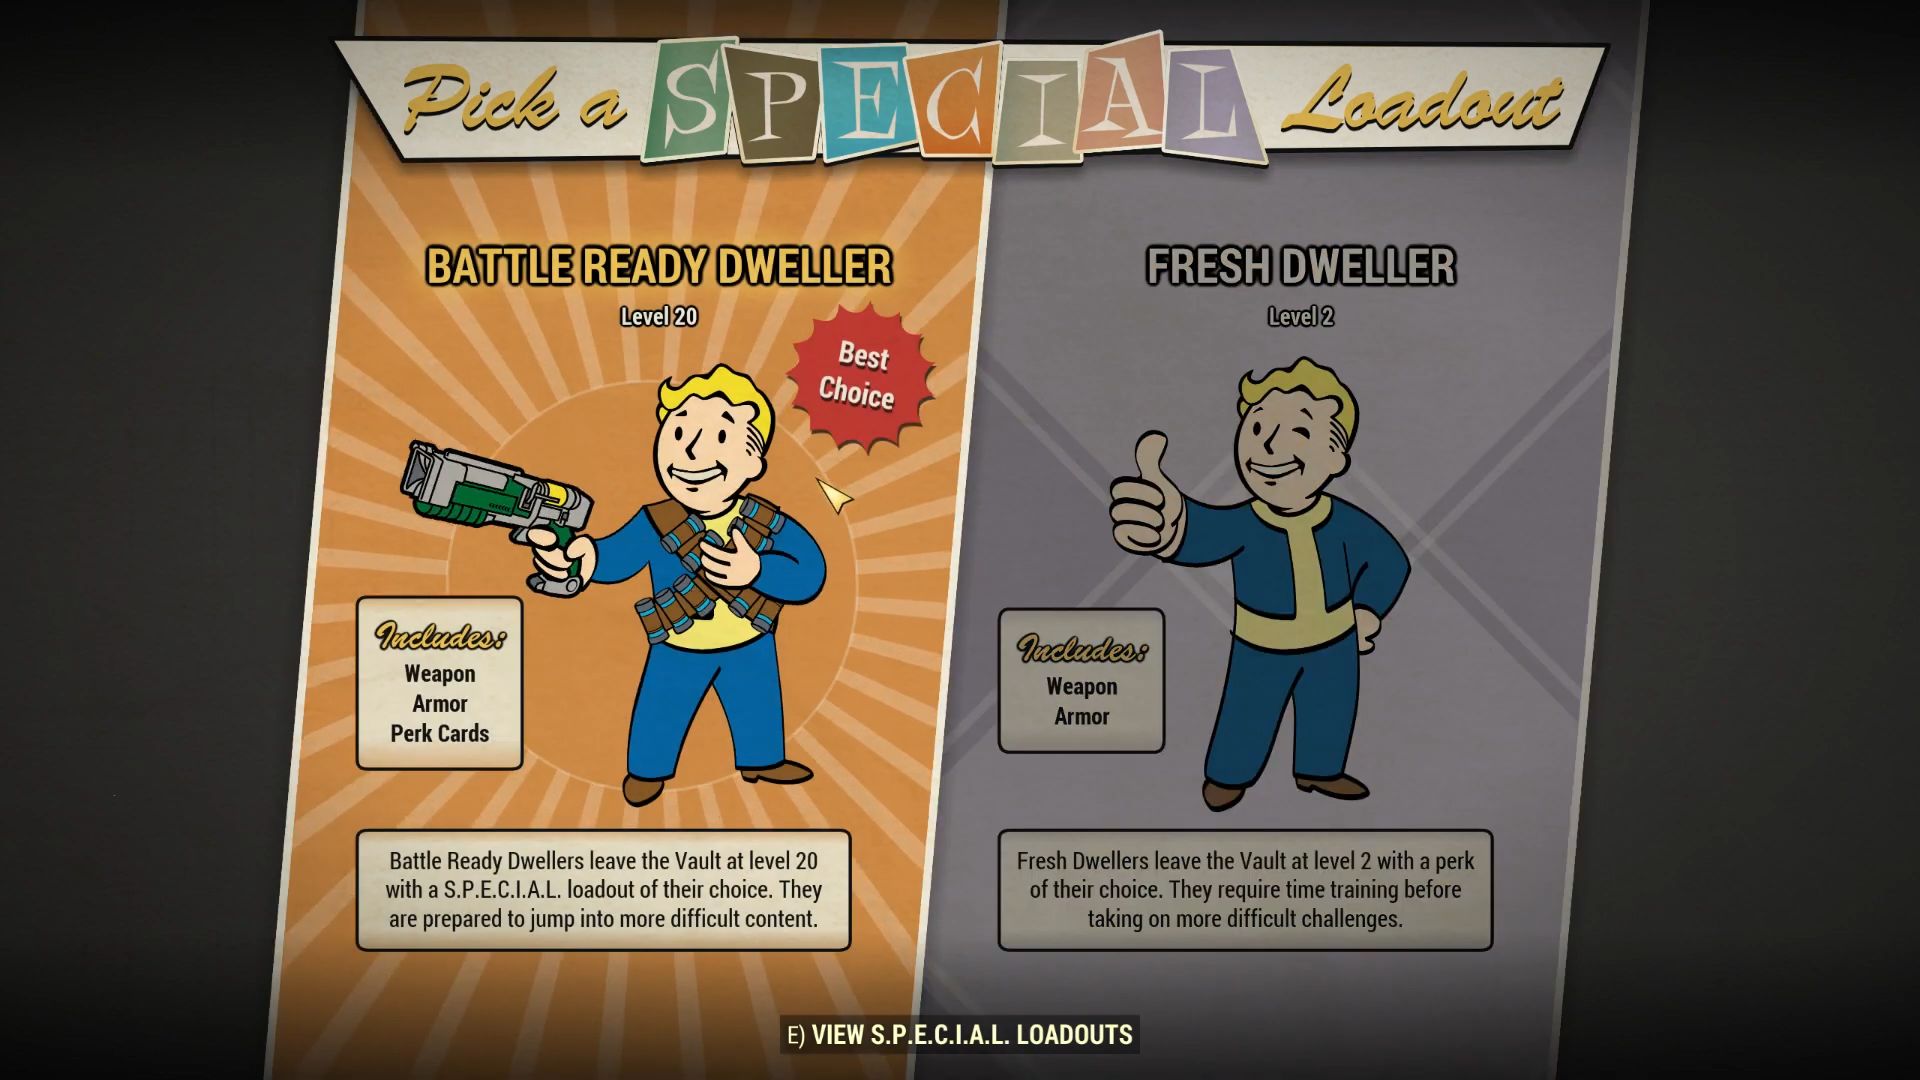 The Battle Ready Dweller choice in Fallout 76